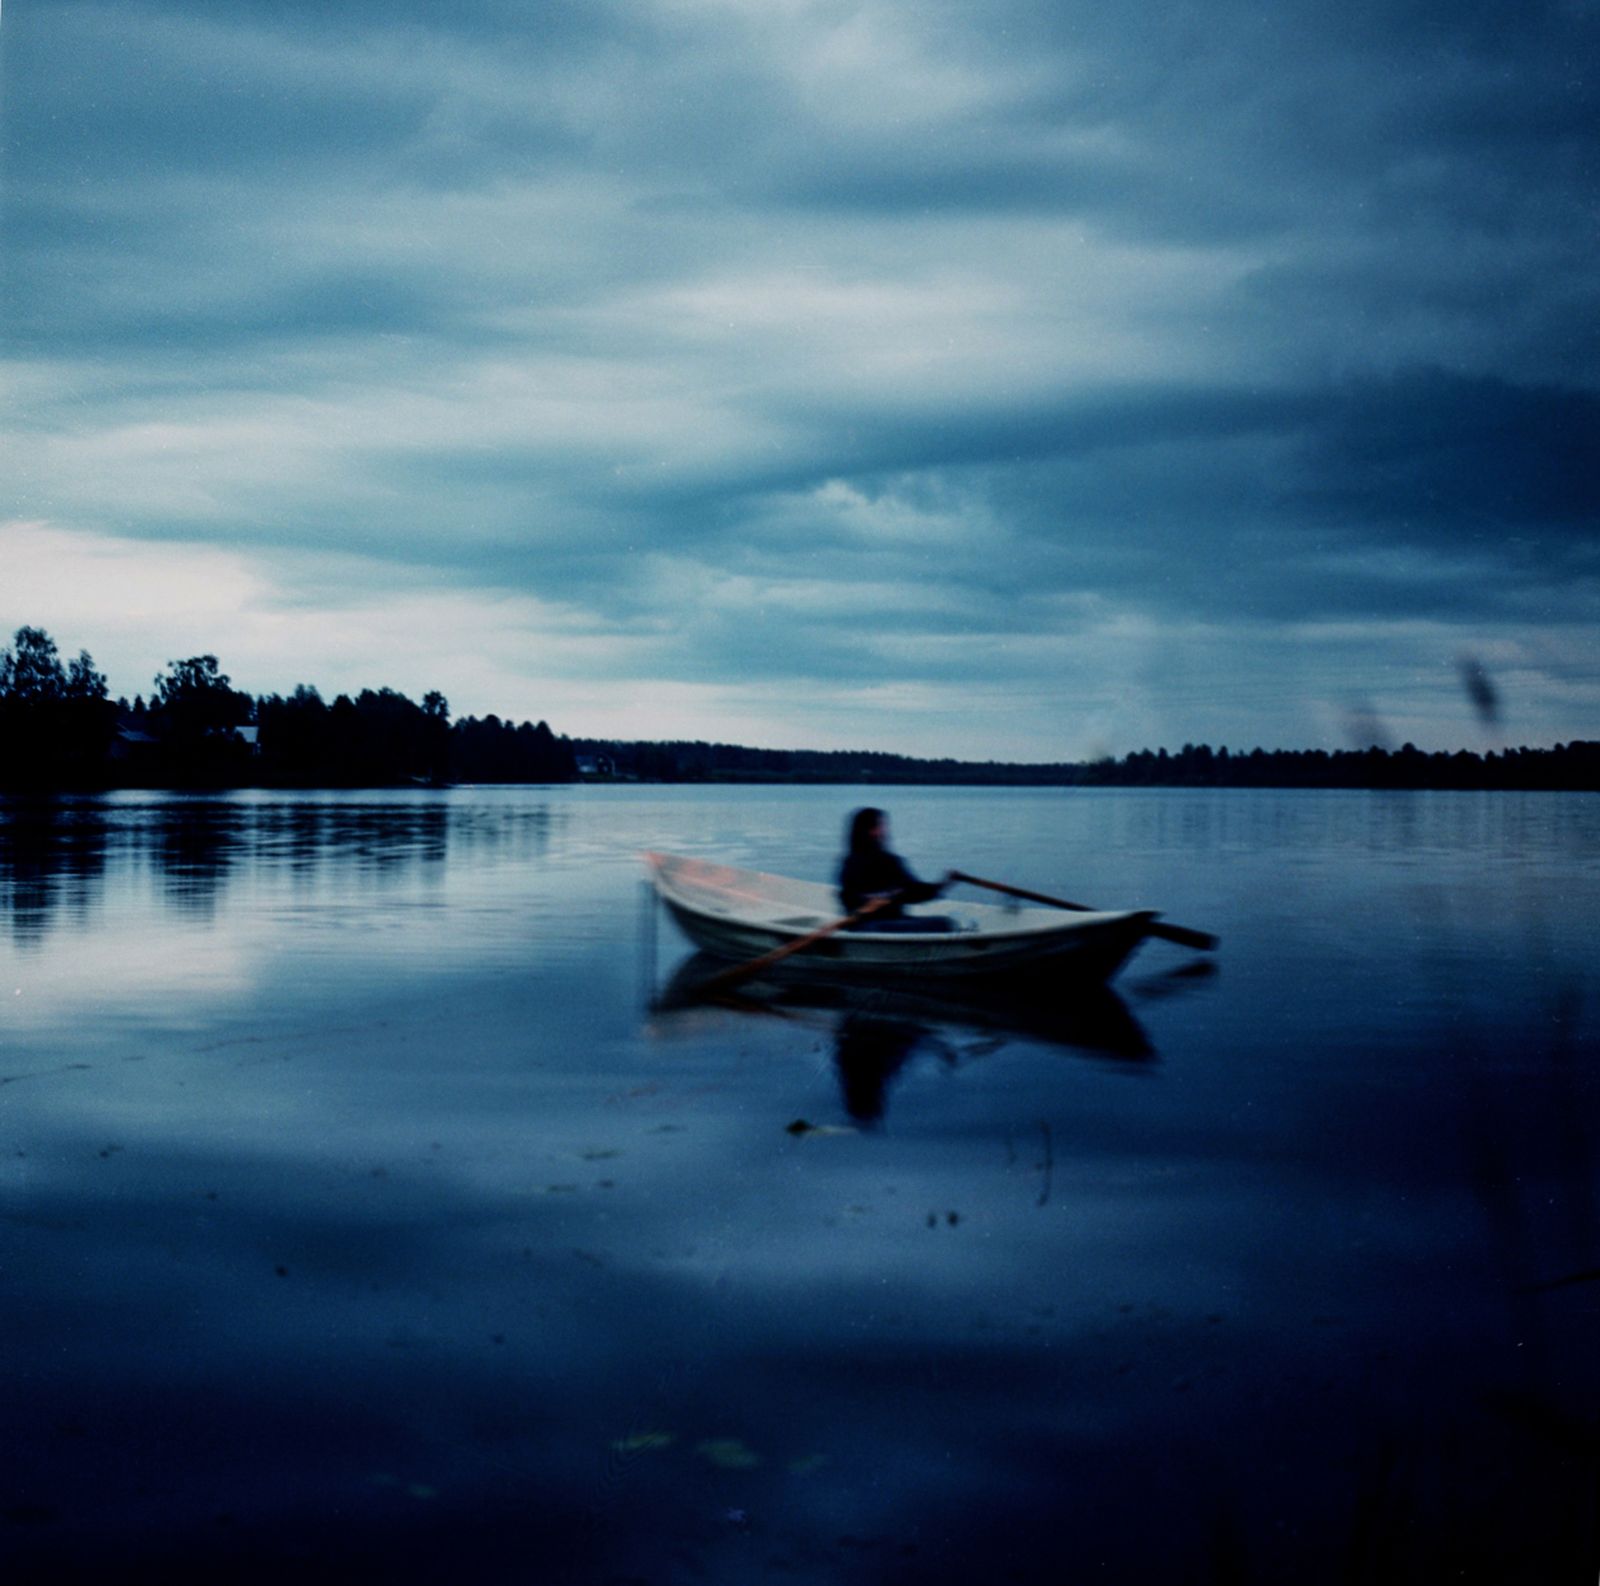 © Janne körkkö - Image from the SONG OF THE RIVERSIDE photography project